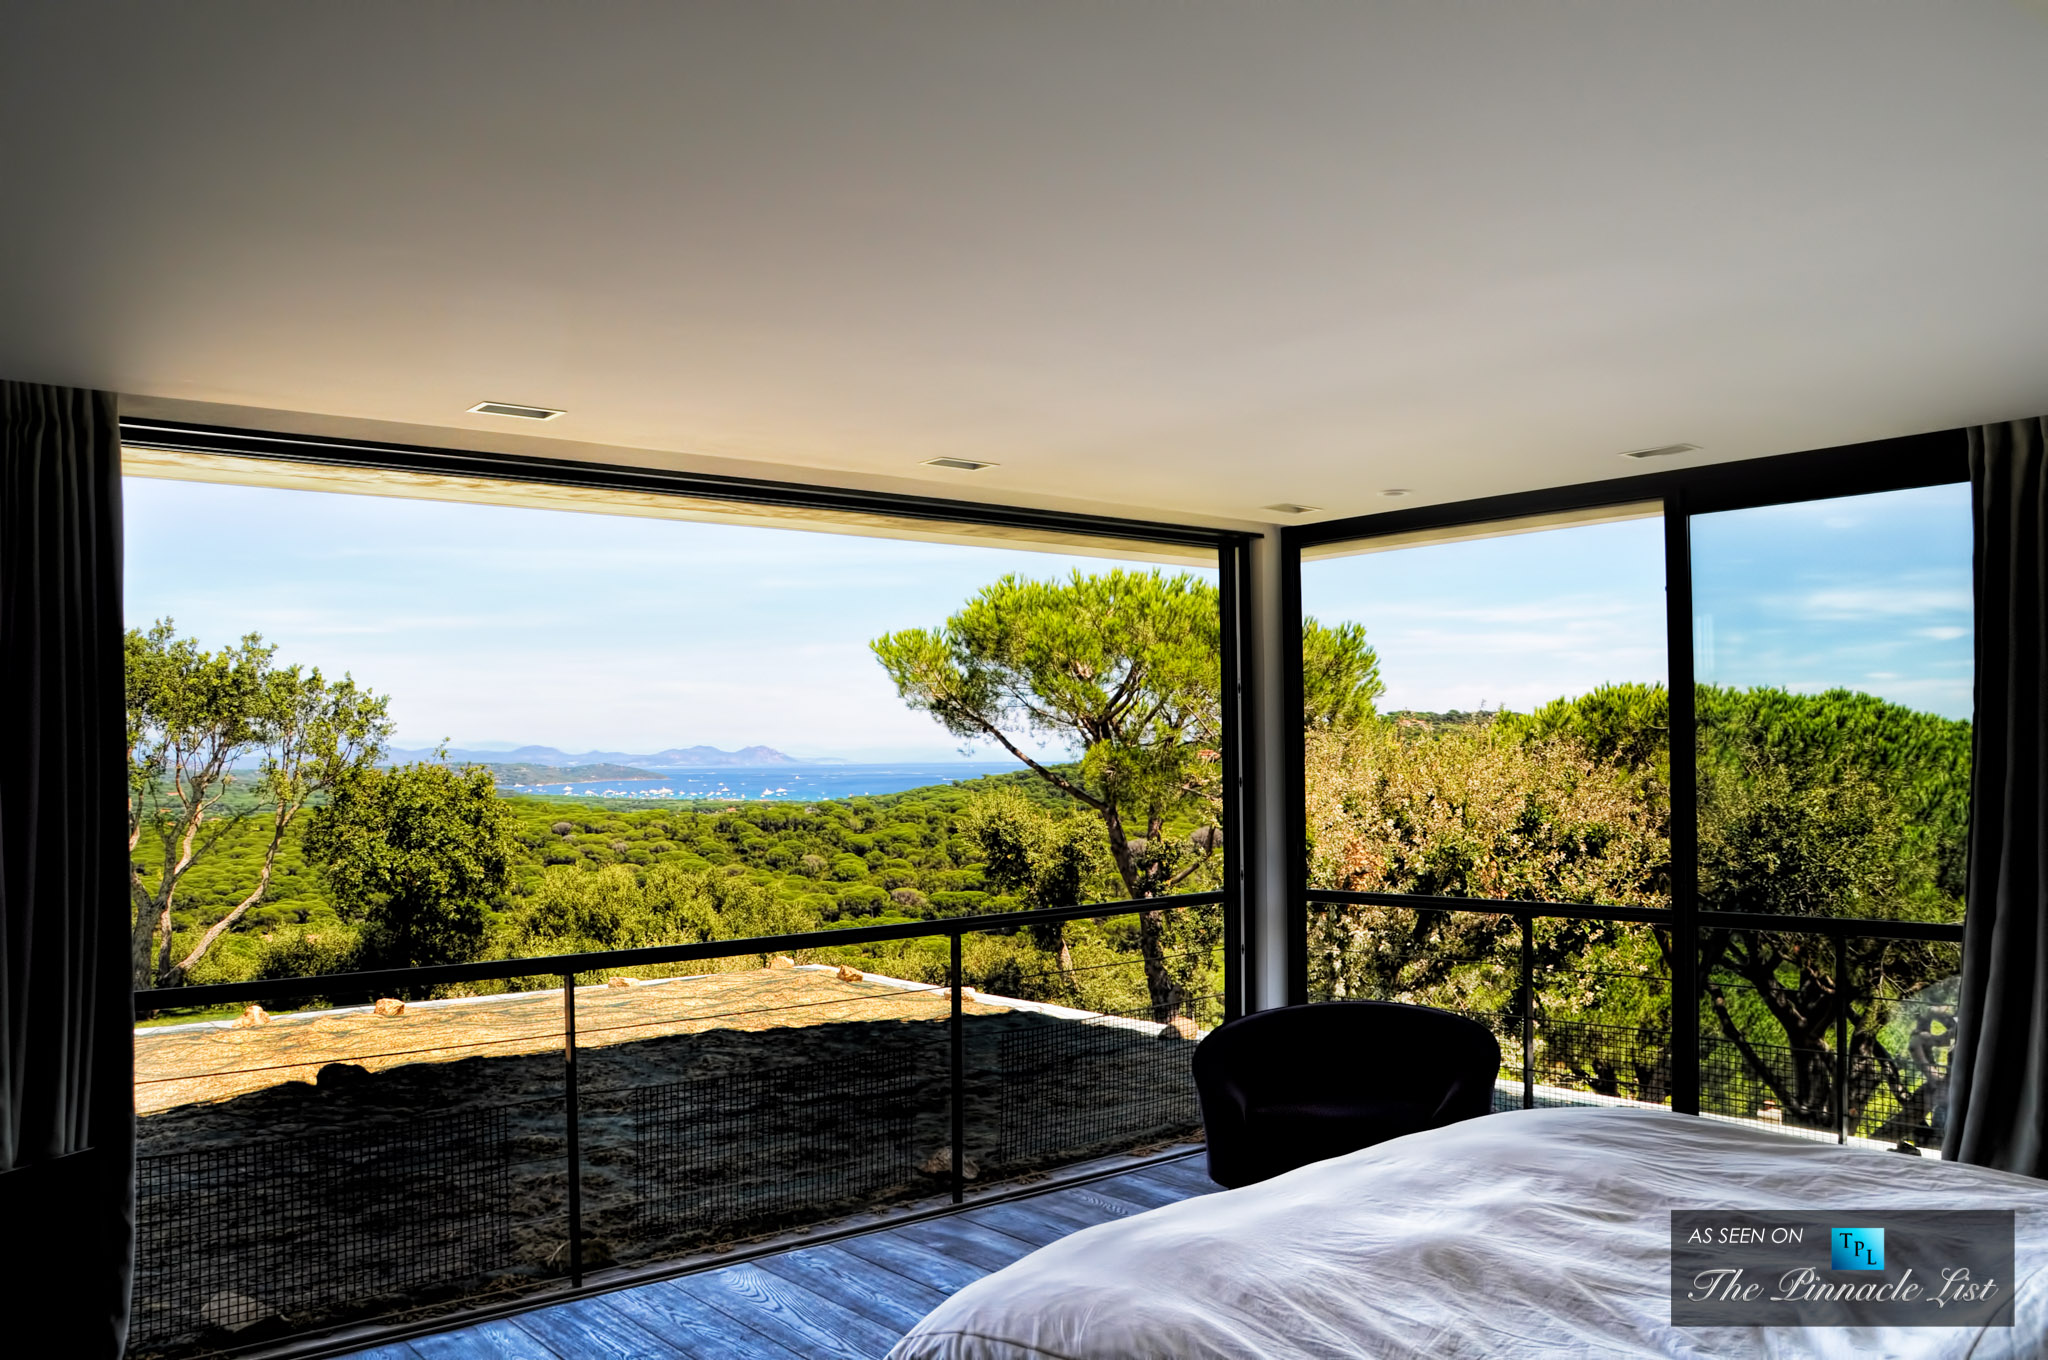 Villa Paradise in St. Tropez – Rent a Family Villa on the French Riviera like No Other